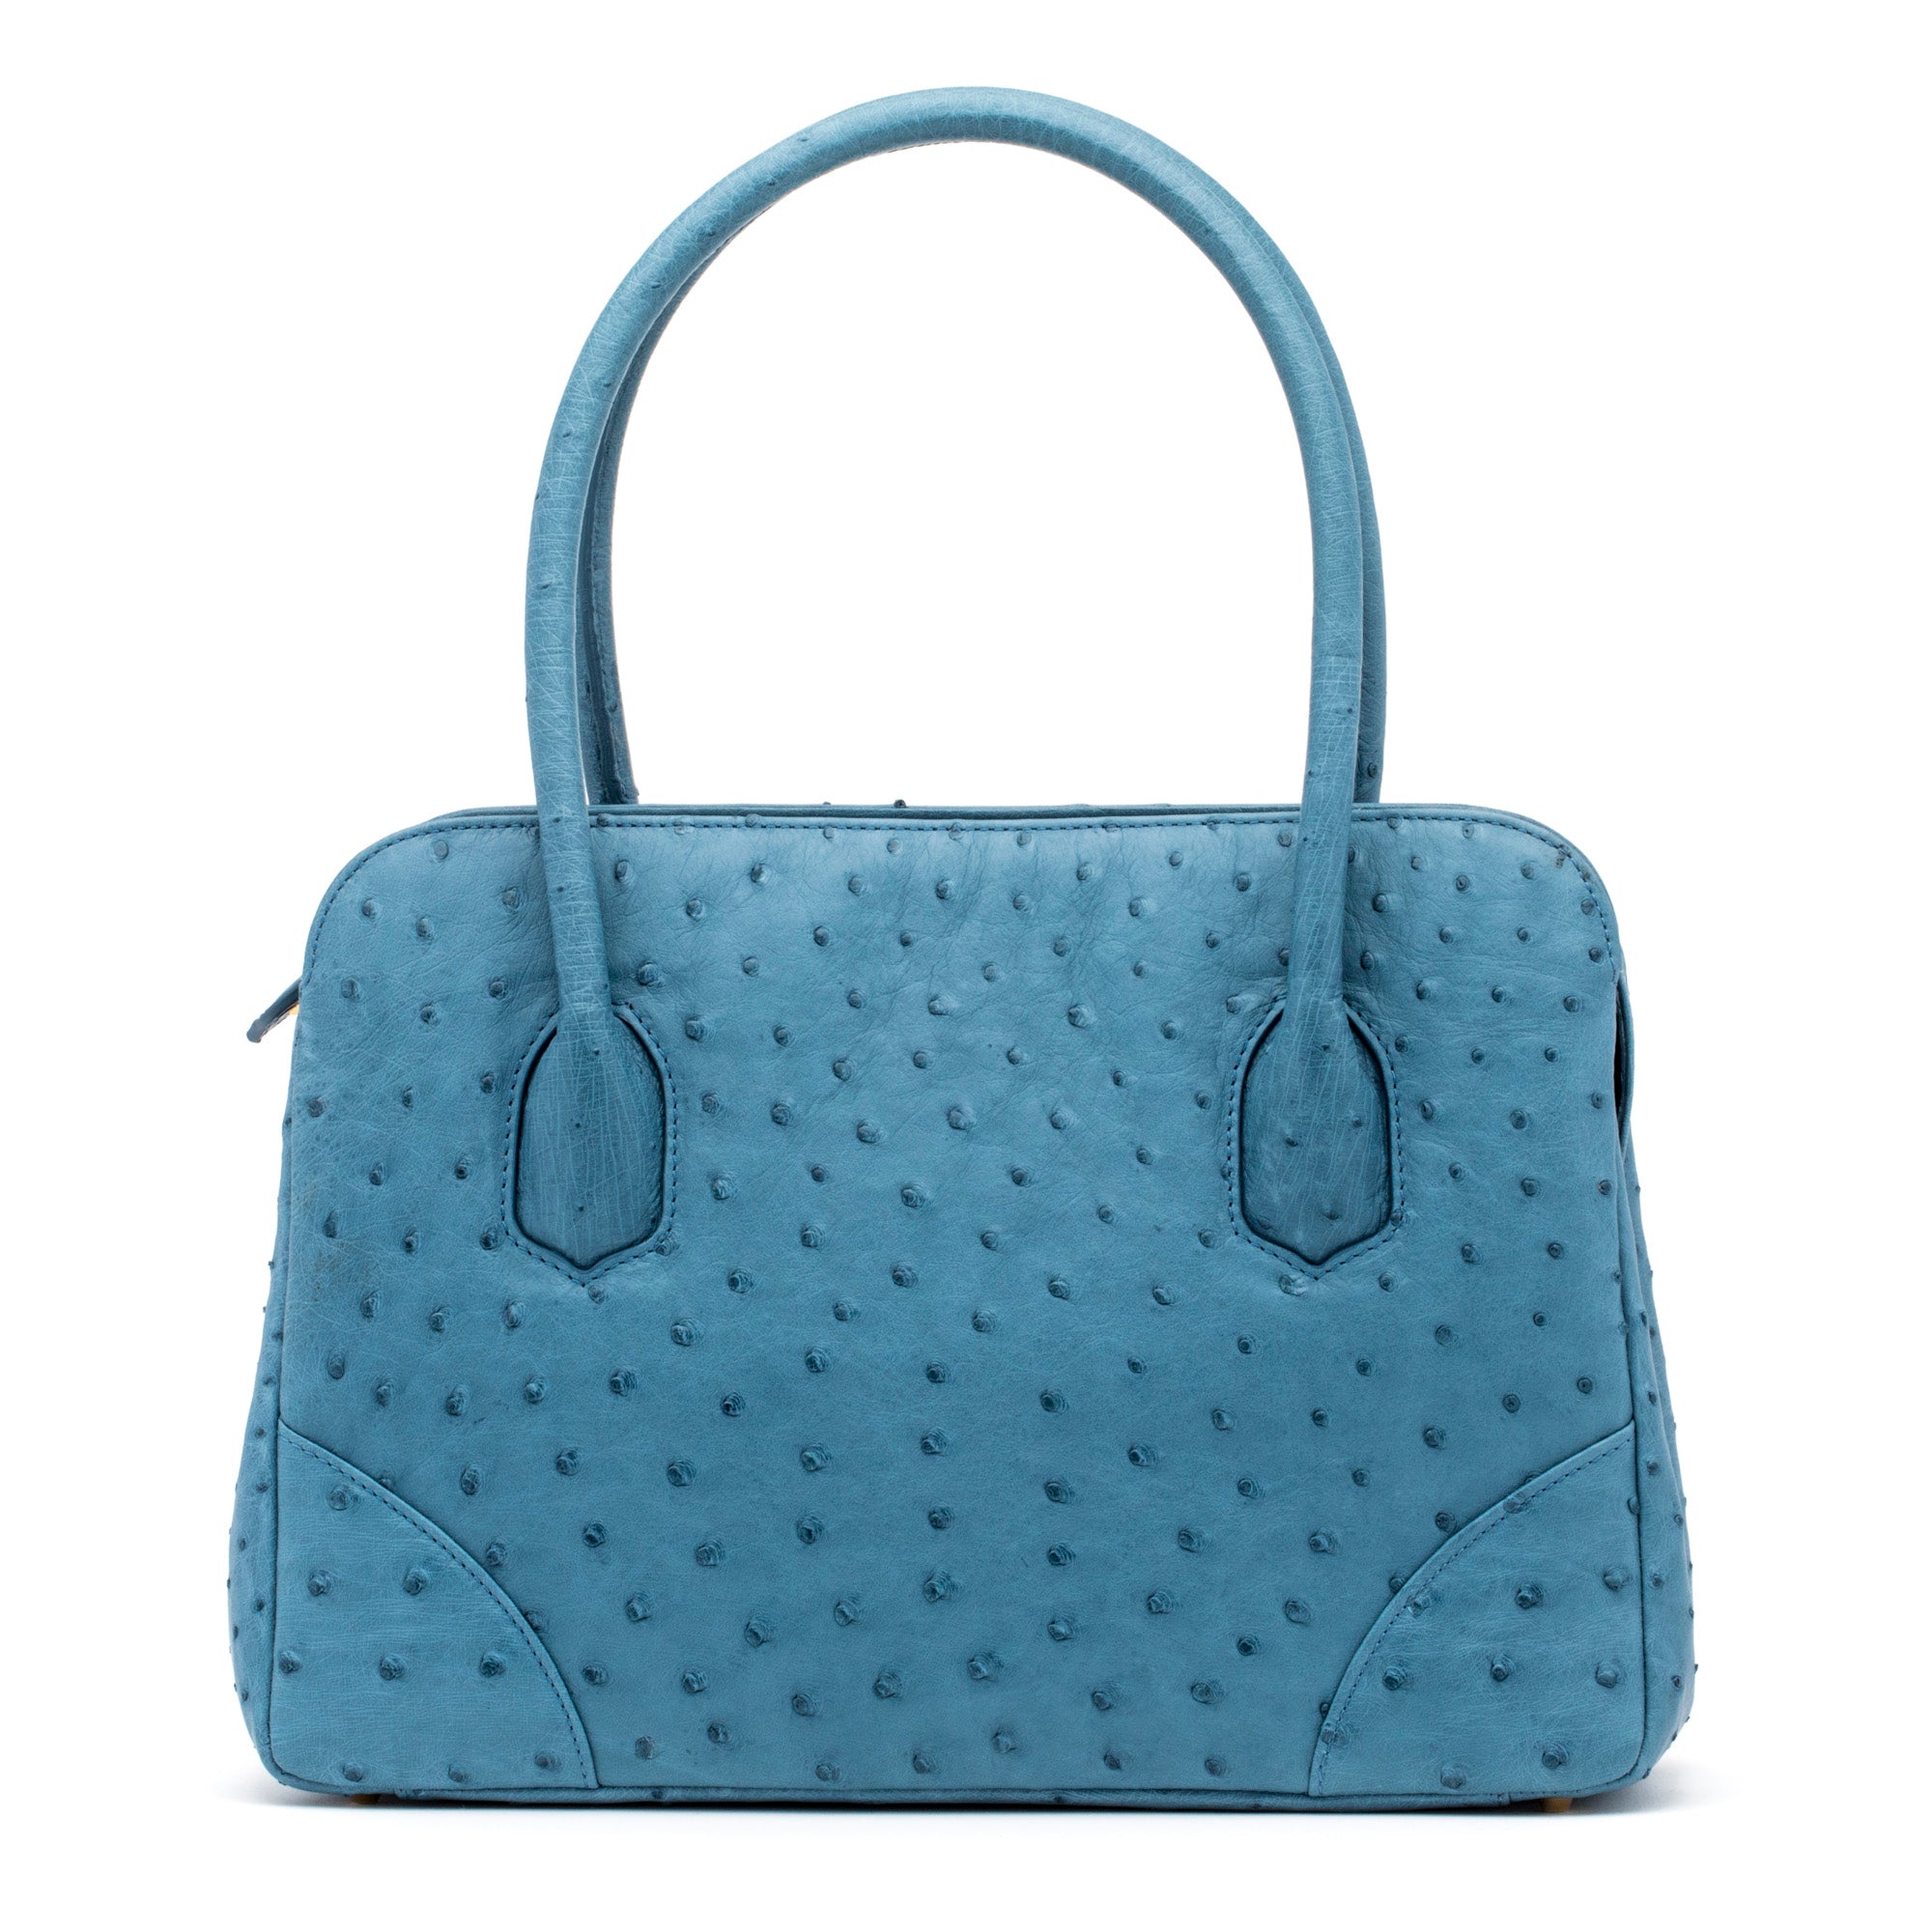 Baby Jet Tote in Blue Jeans